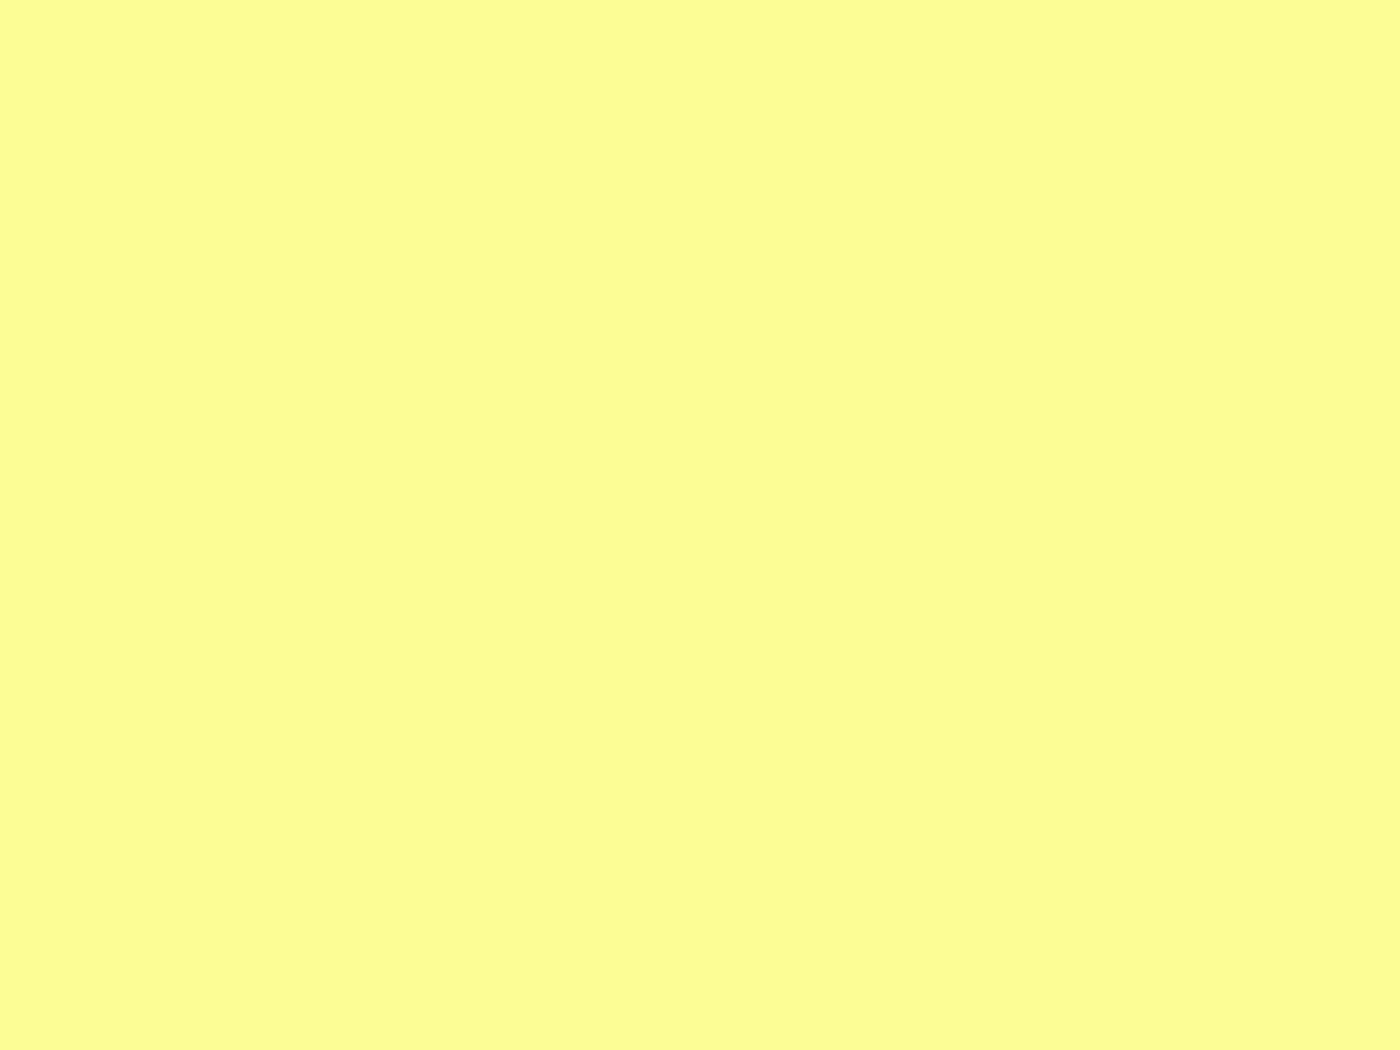 Solid Pastel Yellow Background Image Pictures Becuo